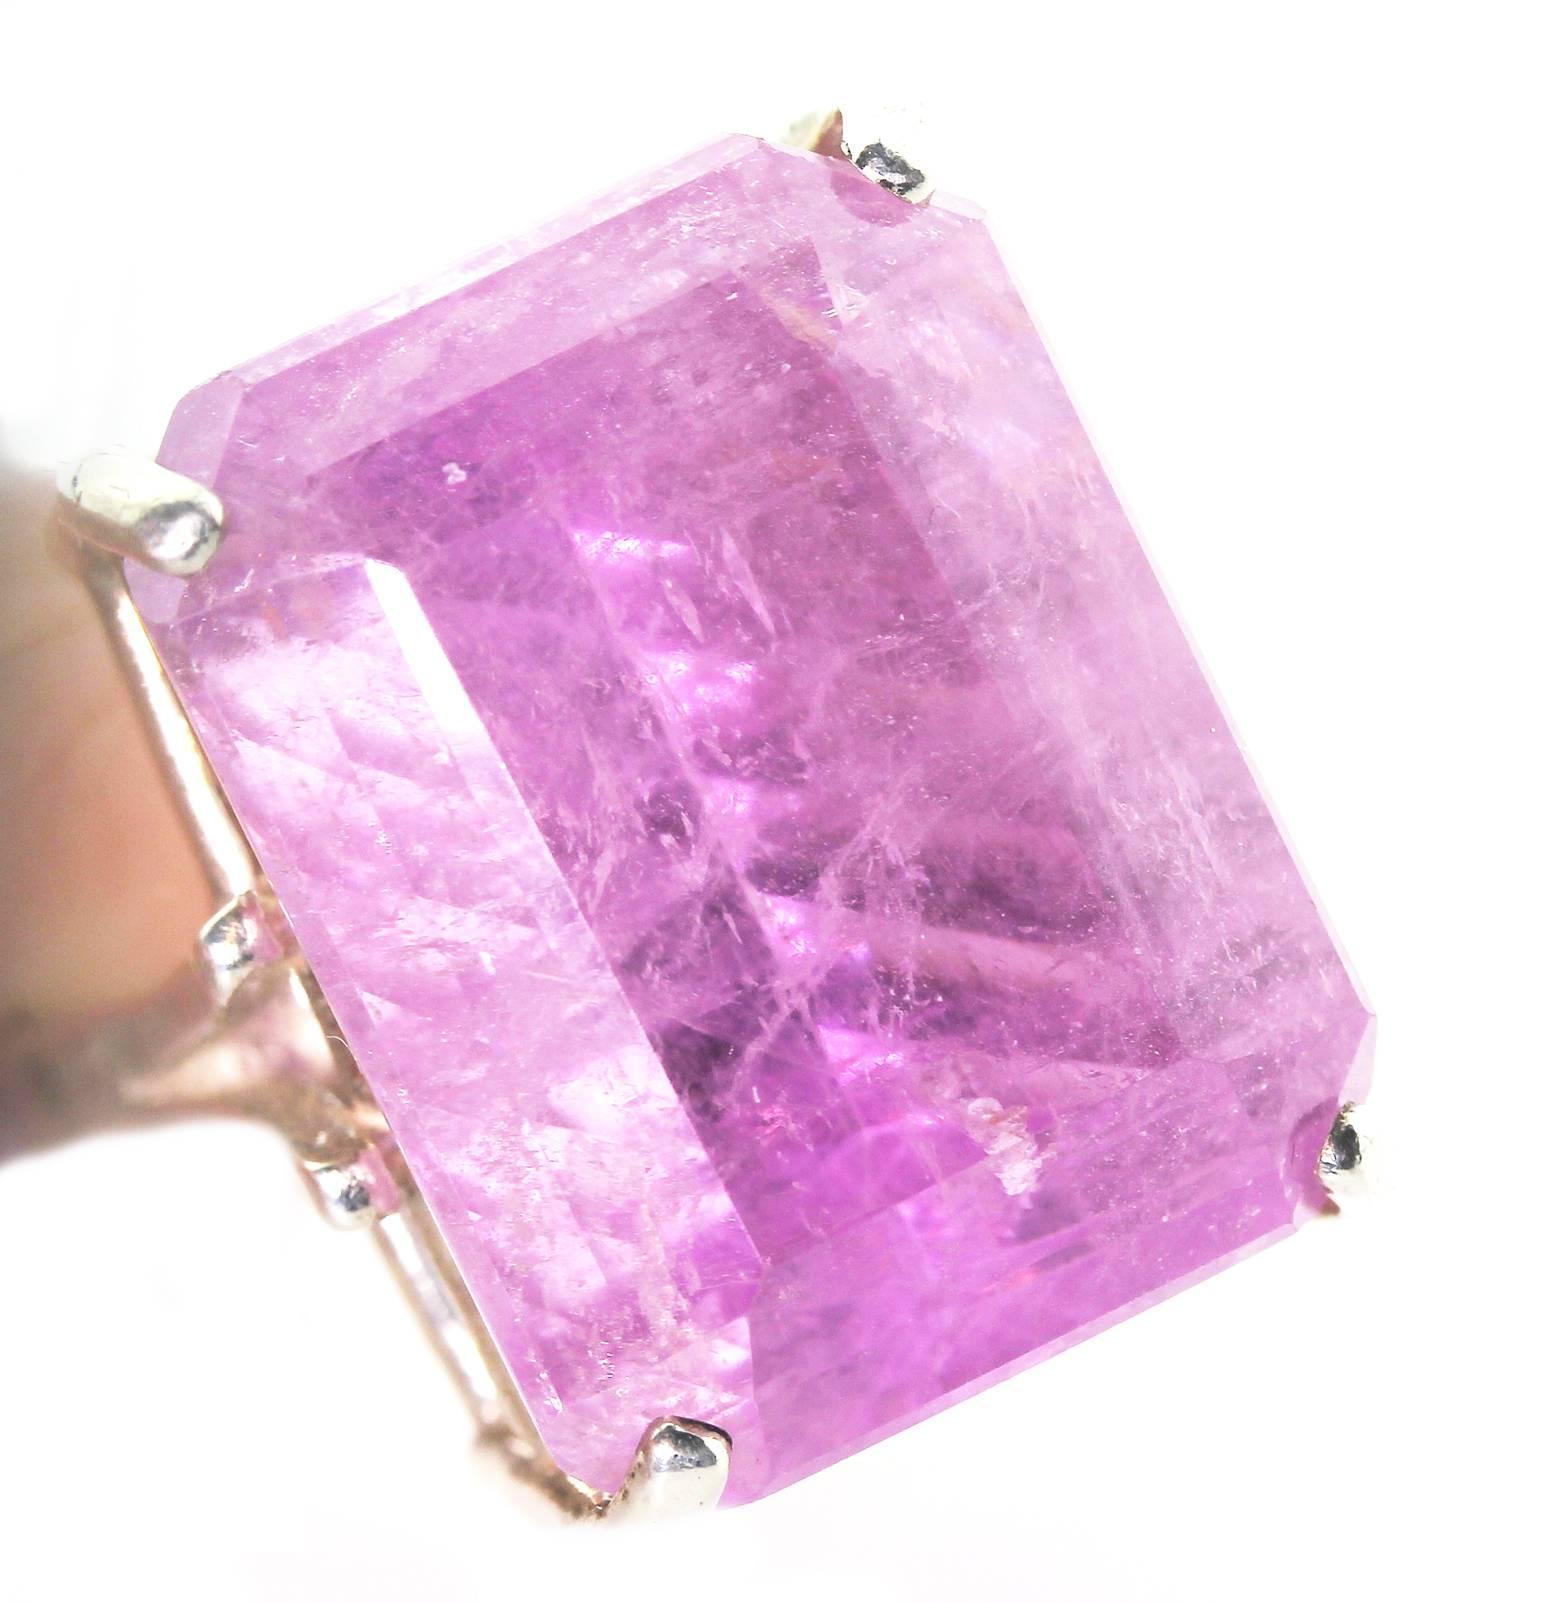 This unique 22.06 Carat natural thick pink glowing Kunzite has an unusual but delightful cut so that it sparkles directionally when you look directly at it.  It is perfect for daytime into evening events.  Size:  19.75 mm x 15 mm in Handmade